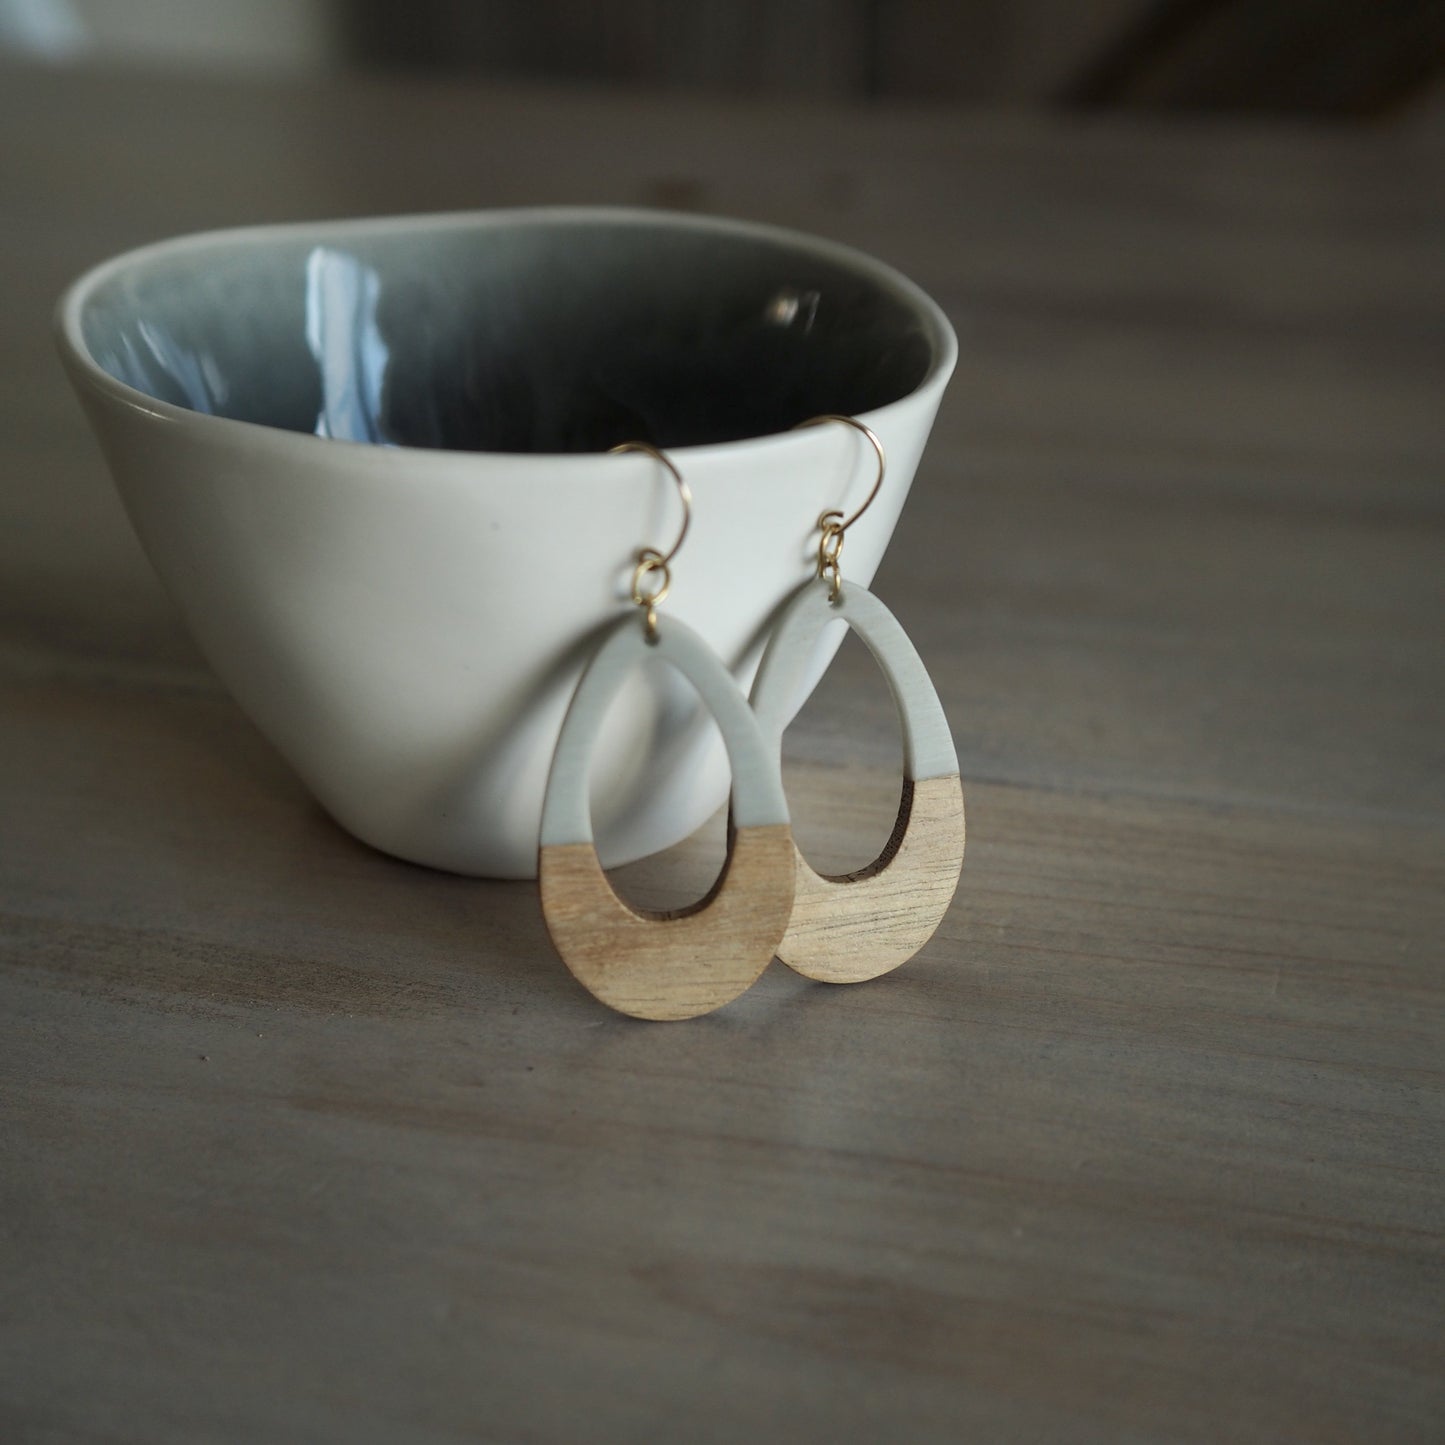 Grey Resin and Wood earrings made in Canada by Wallis Designs